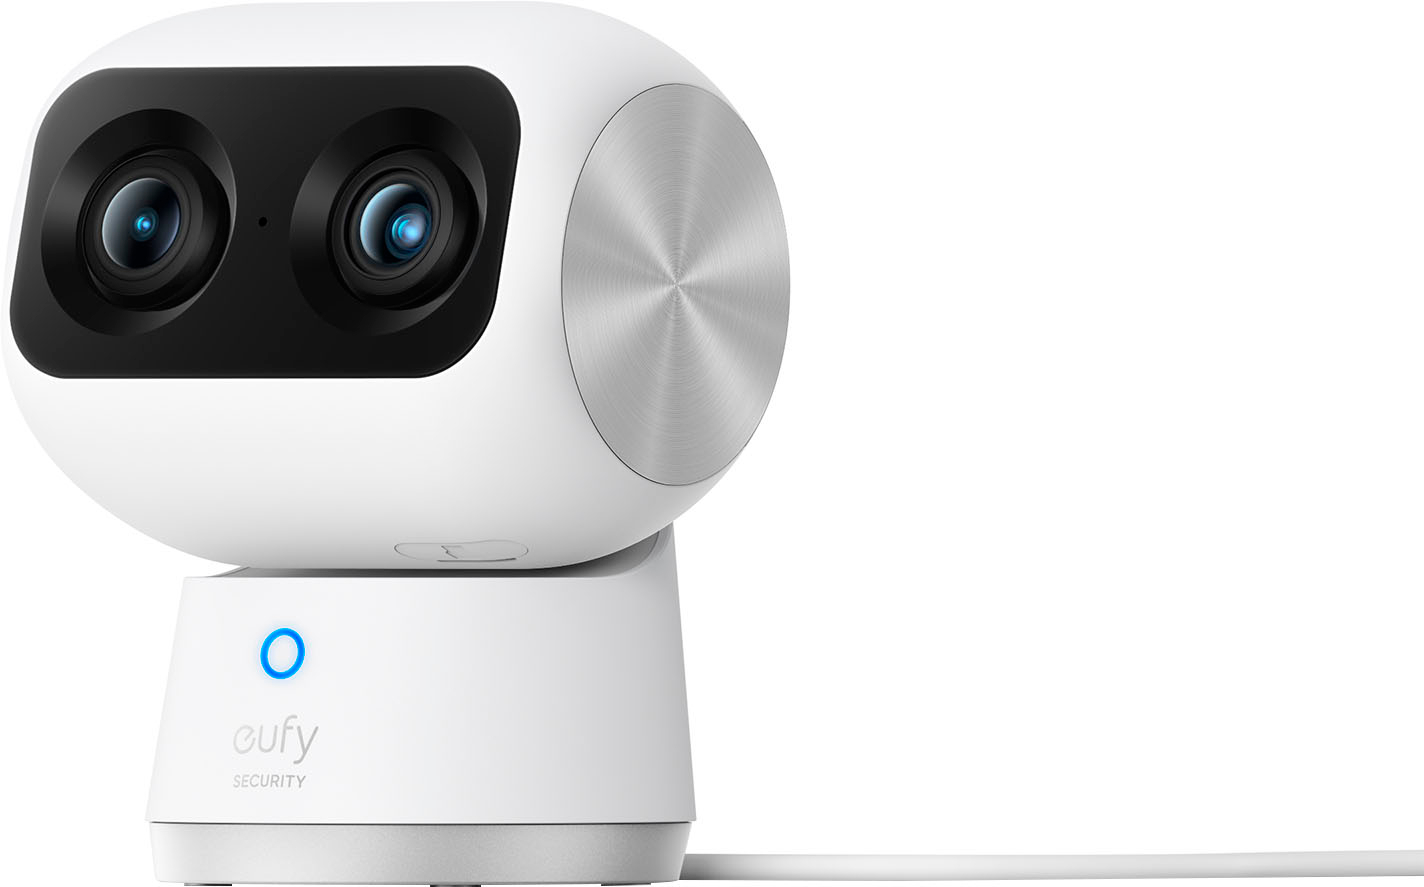 Angle View: eufy Security - IndoorCam S350 Wired Indoor Security Camera with 360 Degree Surveillance - White